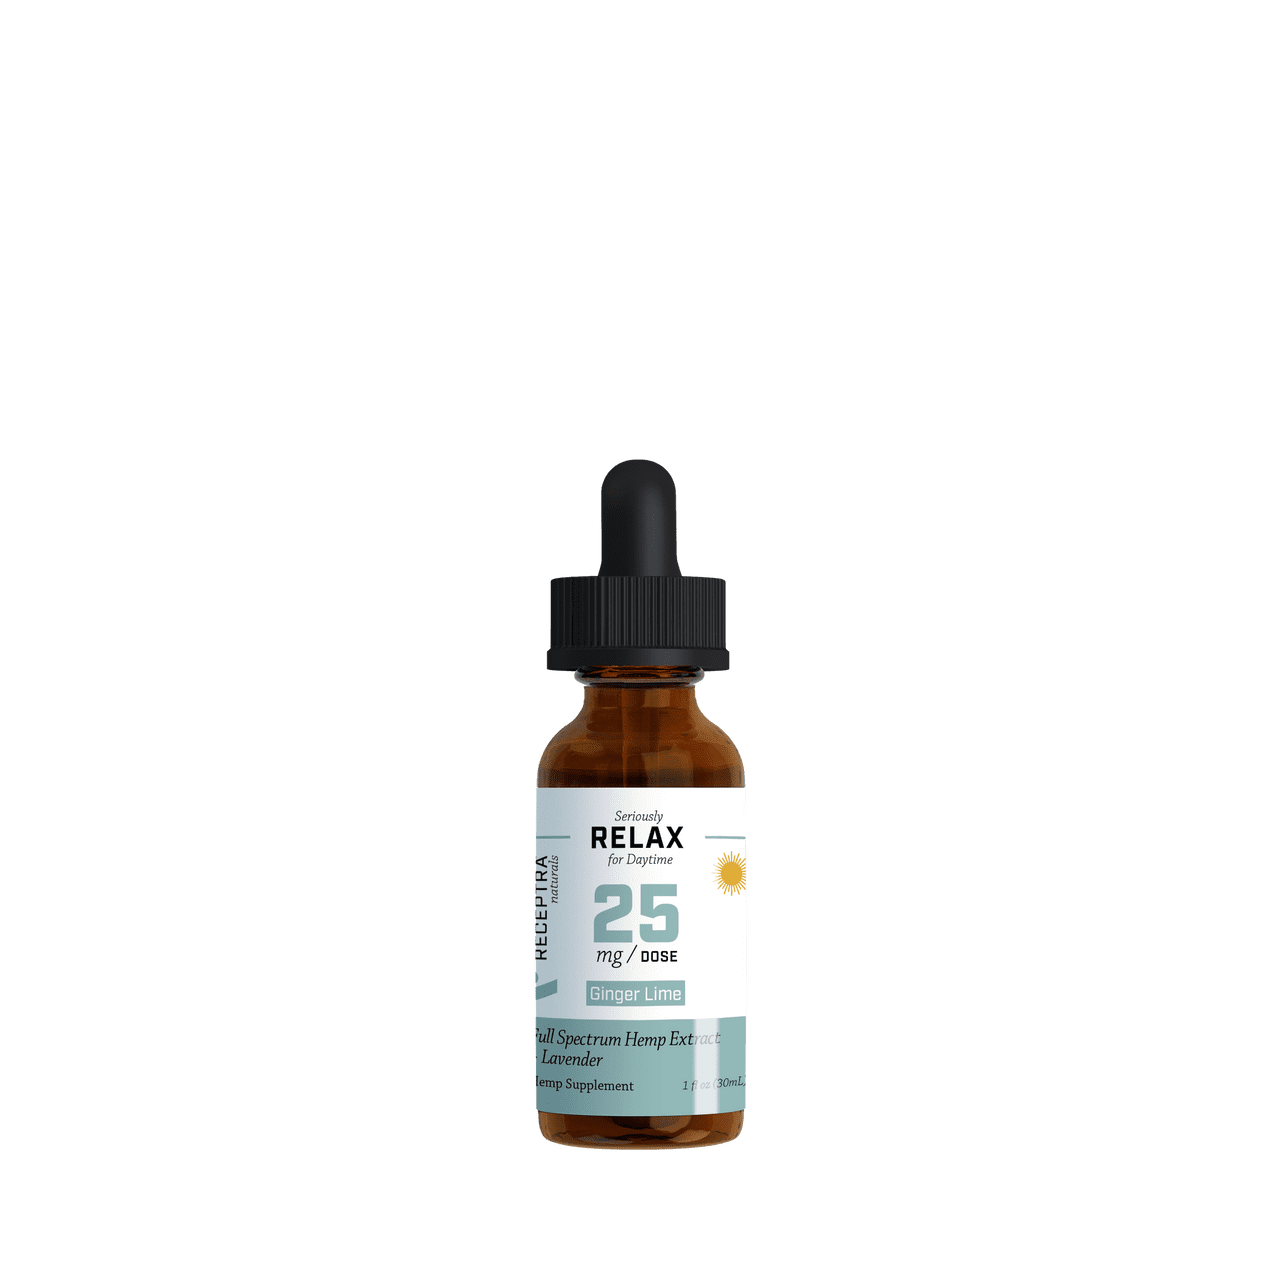 Seriously Relax + Lavender Tincture 25mg /dose logo